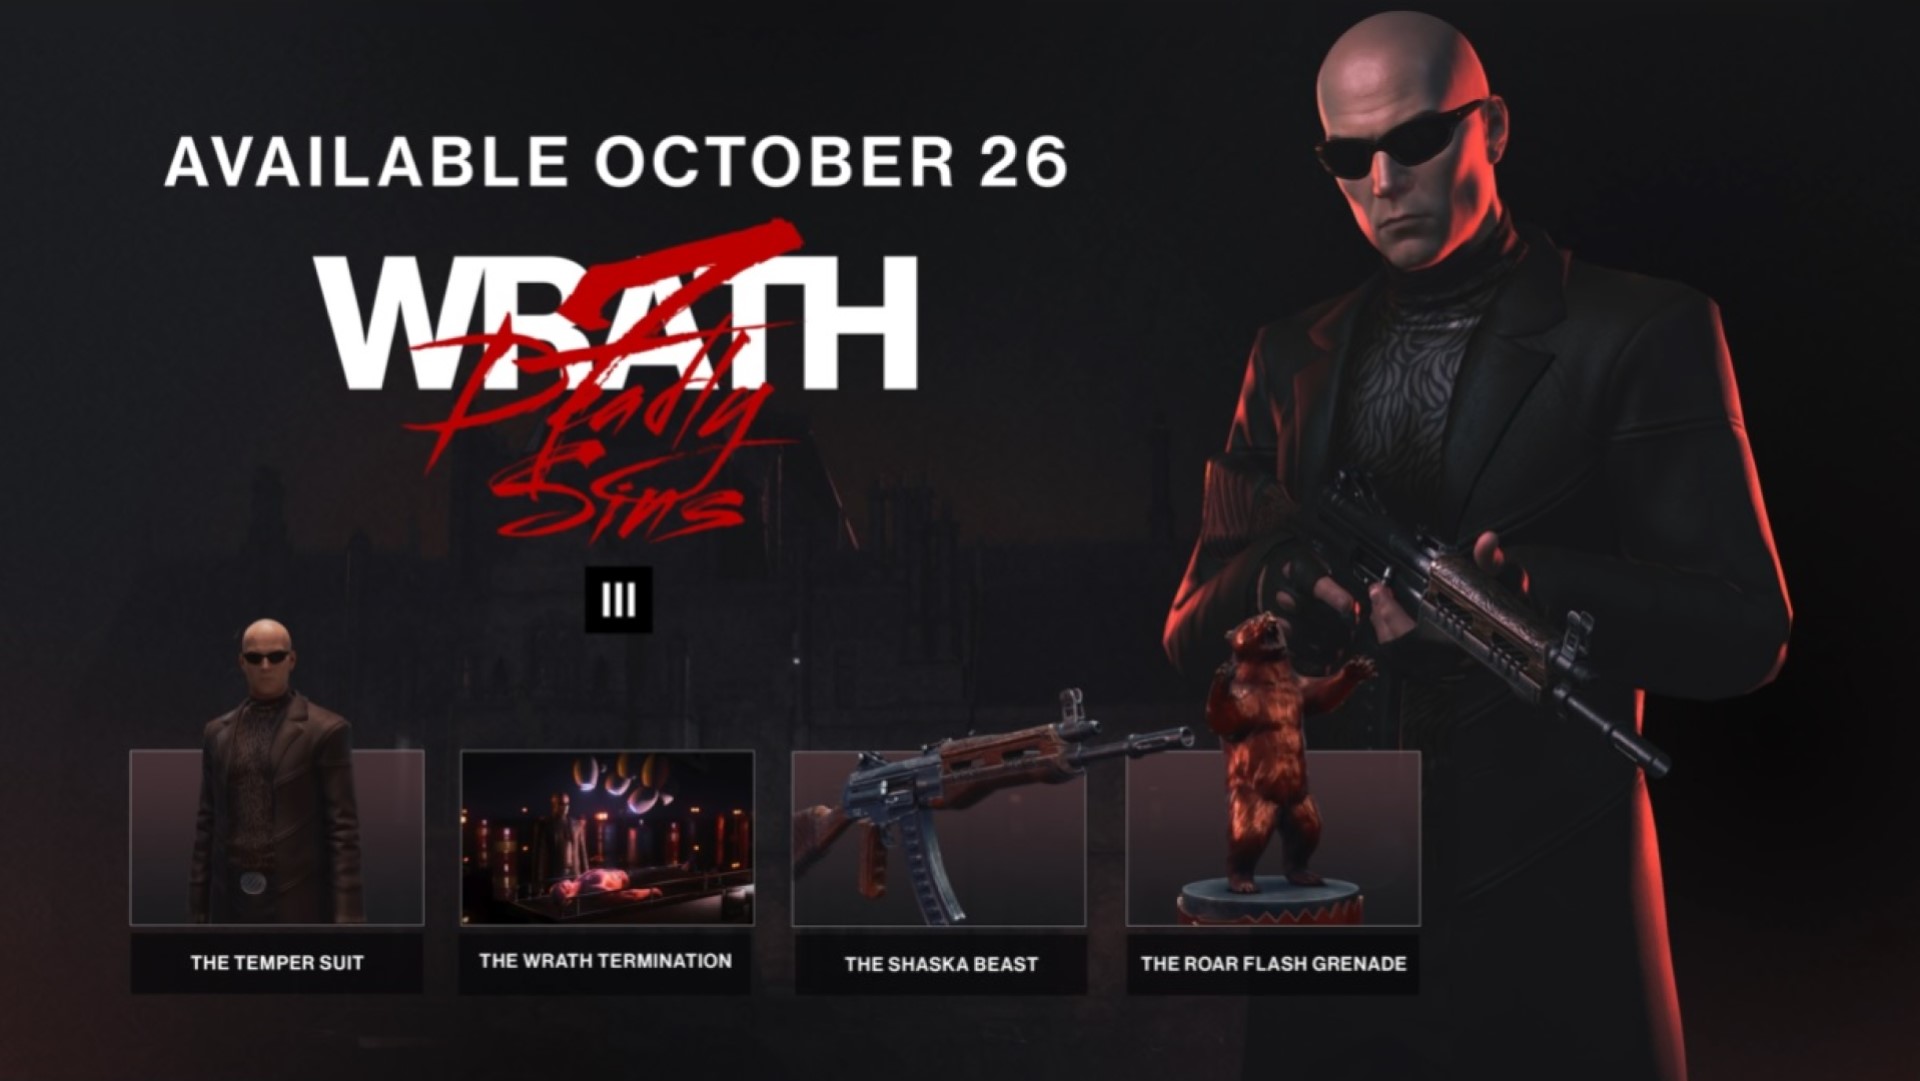 Hitman 3 gameplay trailer shows Agent 47 in action using a feather duster  as a weapon